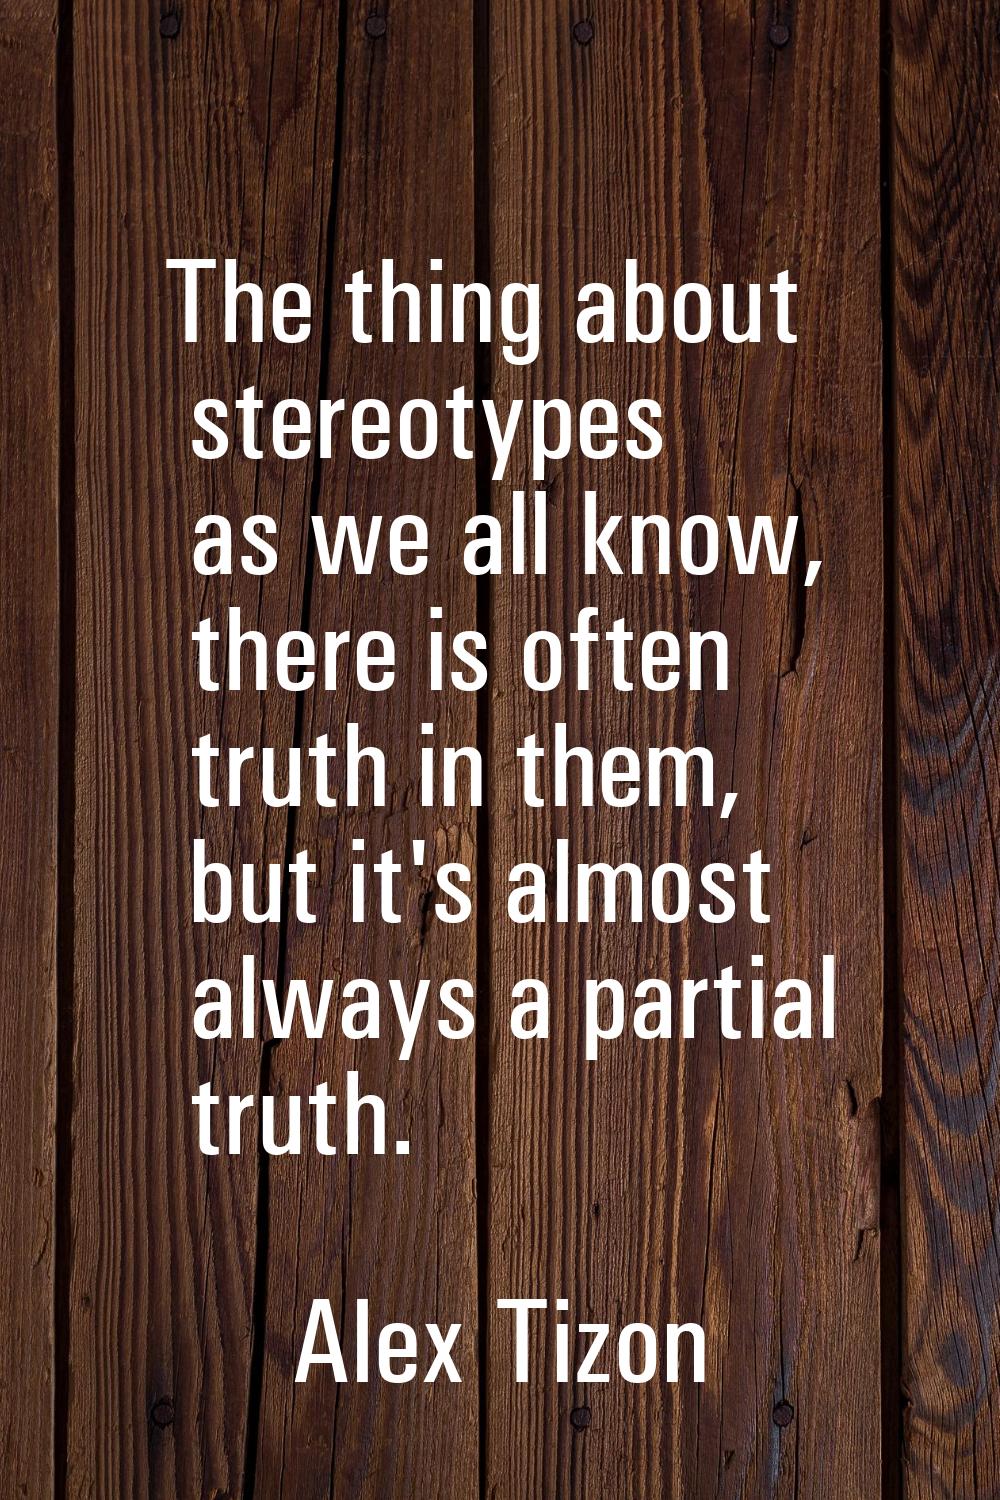 The thing about stereotypes as we all know, there is often truth in them, but it's almost always a 